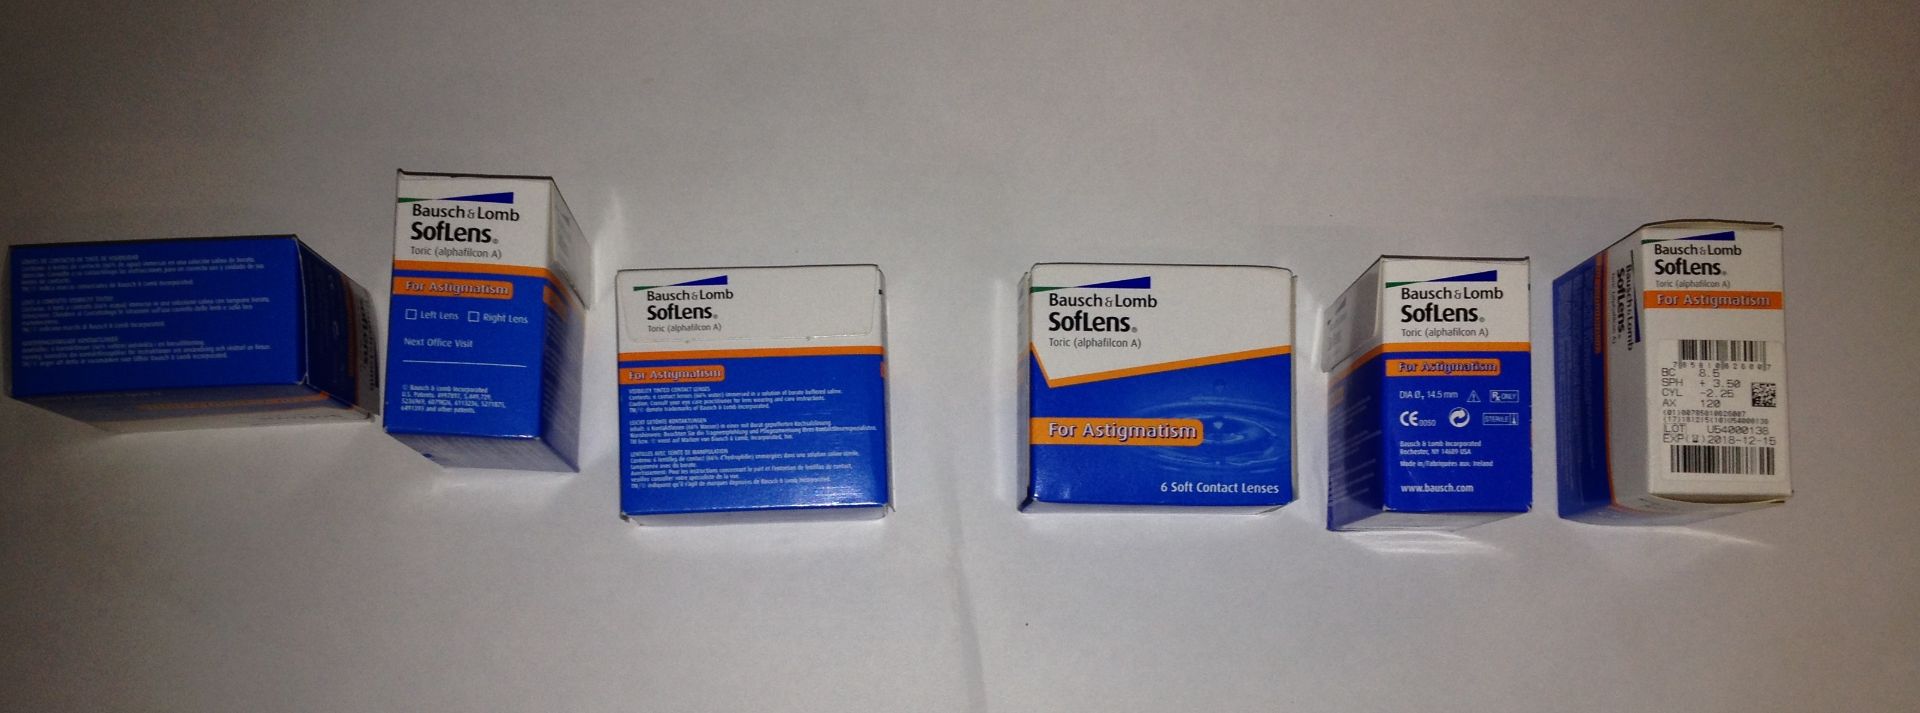 50 x 6 x Bausch & Lomb Softlens Toric (alphafilicon A) For Astigmatism contact lenses - Image 2 of 2